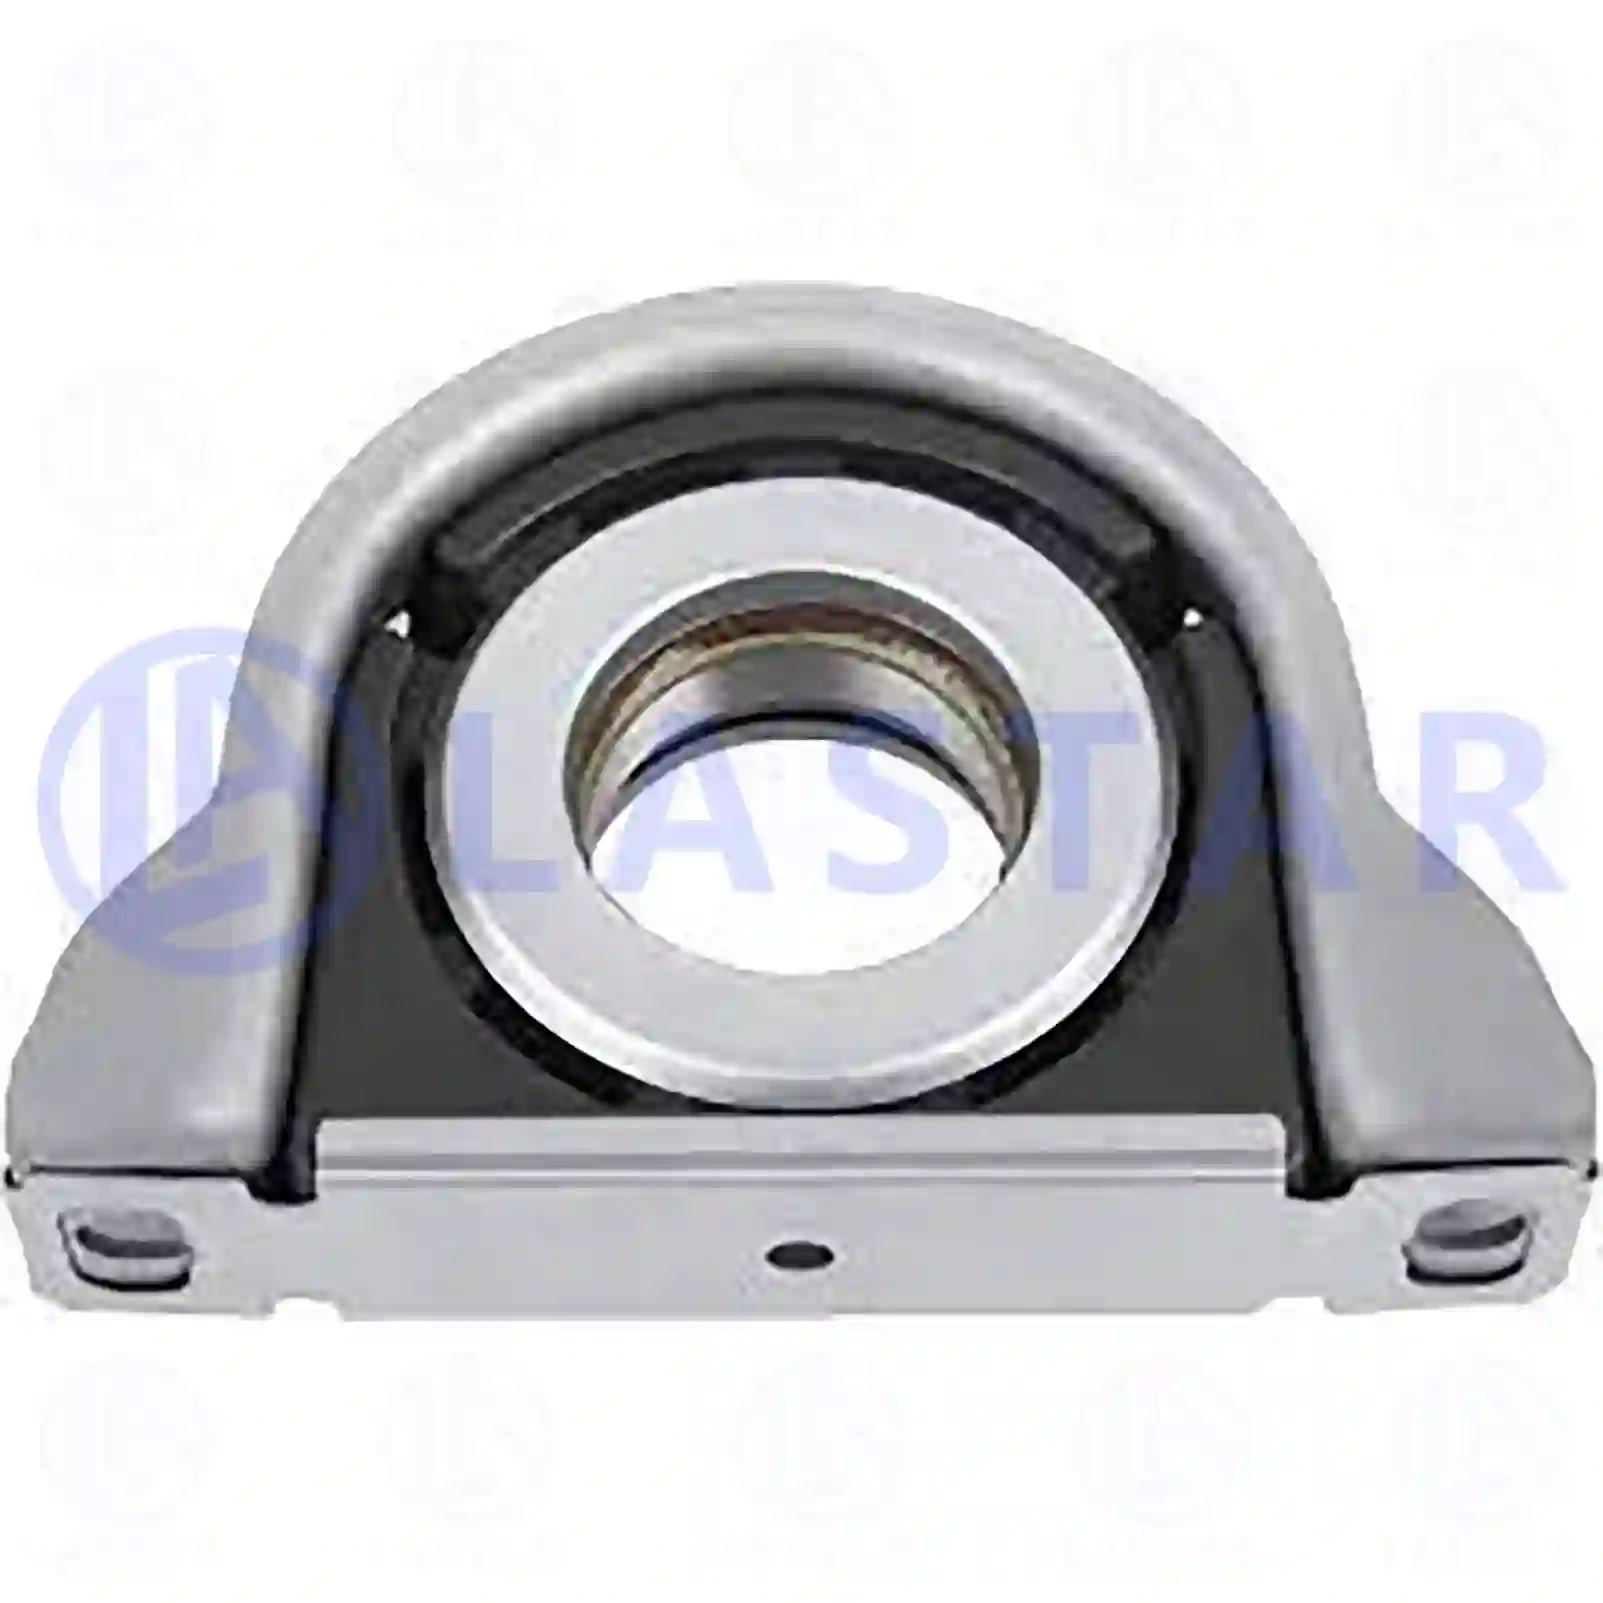 Support Bearing Center bearing, la no: 77734351 ,  oem no:93194978, ZG02504-0008 Lastar Spare Part | Truck Spare Parts, Auotomotive Spare Parts